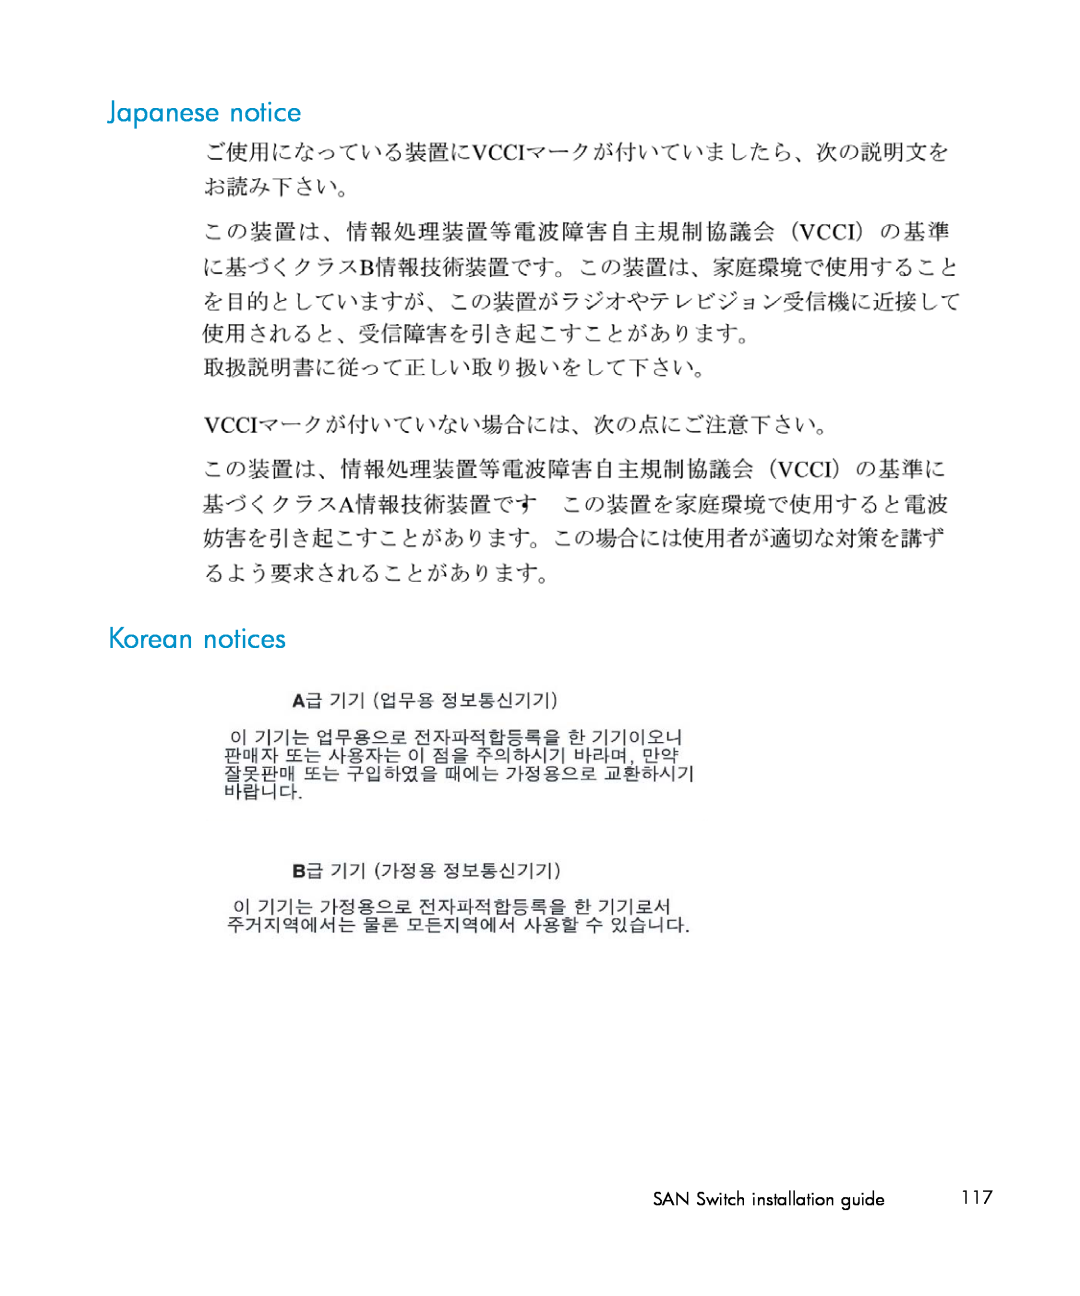 IBM AA-RWF3A-TE manual Japanese notice Korean notices, SAN Switch installation guide 